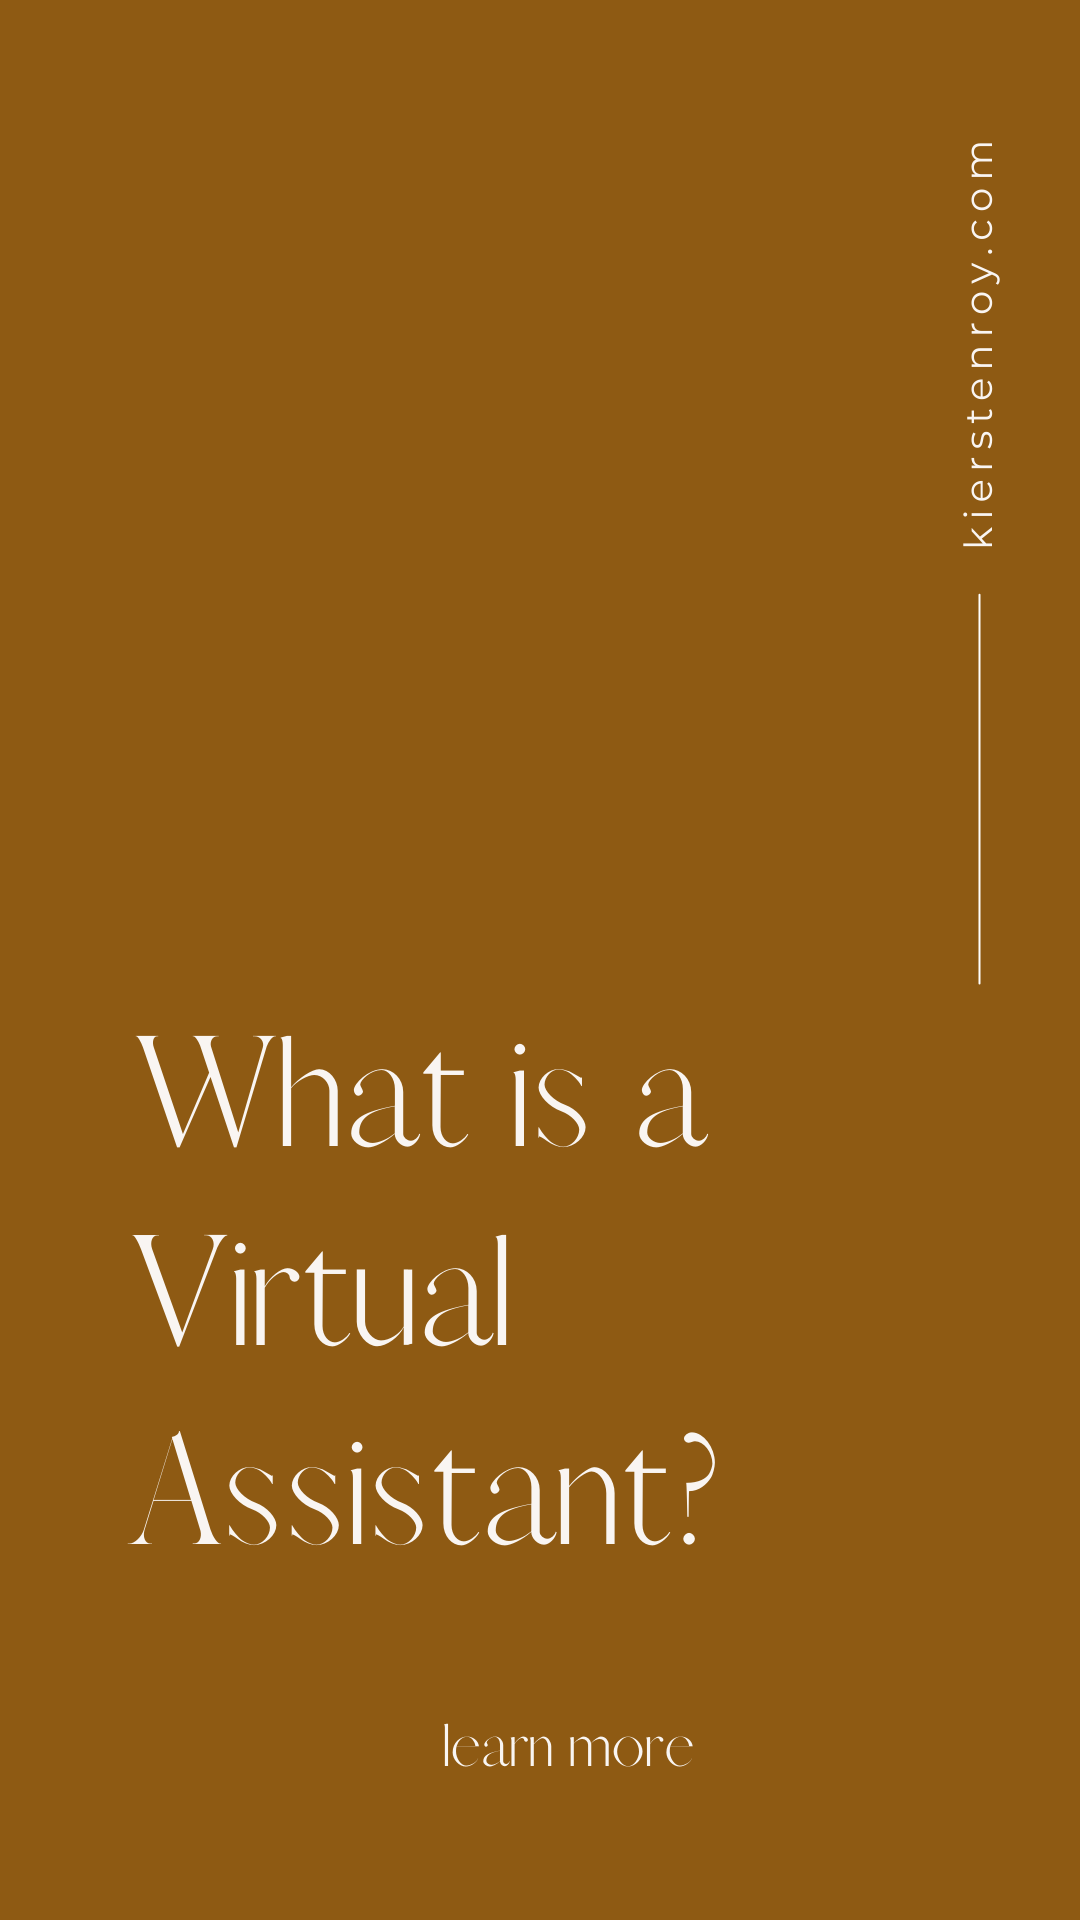 What Is a Virtual Assistant?